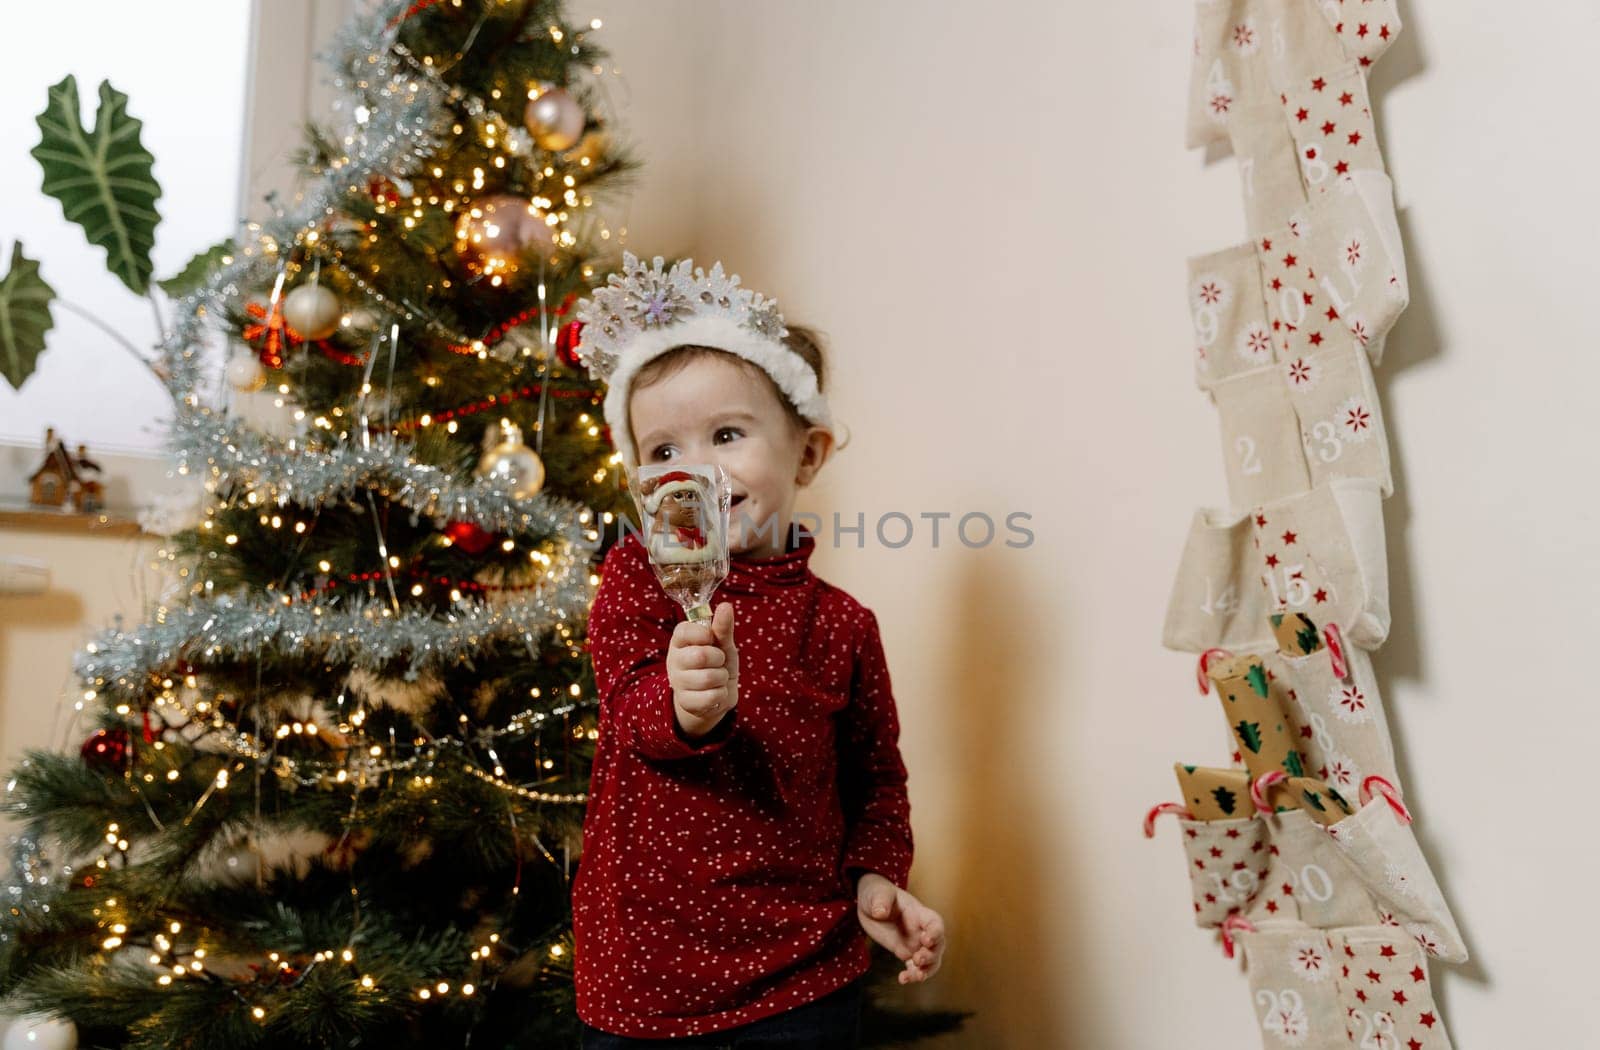 One little Caucasian girl with a white tiara of snowflakes stands between a Christmas tree and an advent calendar, holding a chocolate santa claus with one hand and covering one eye with it while standing in the living room, looking cutely to the side, close-up side view.